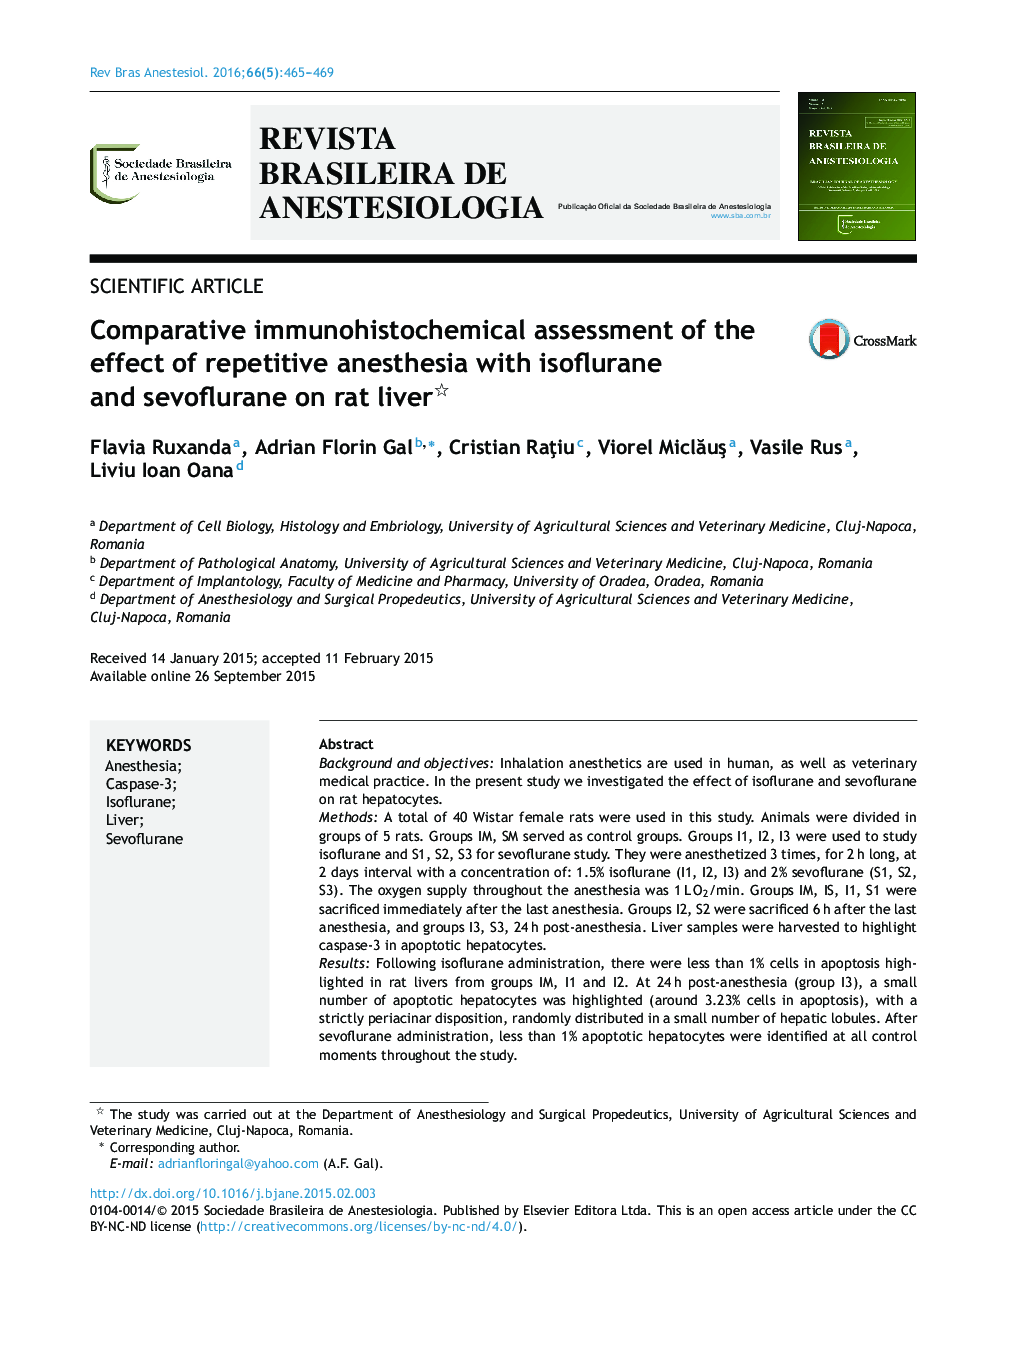 Comparative immunohistochemical assessment of the effect of repetitive anesthesia with isoflurane and sevoflurane on rat liver 